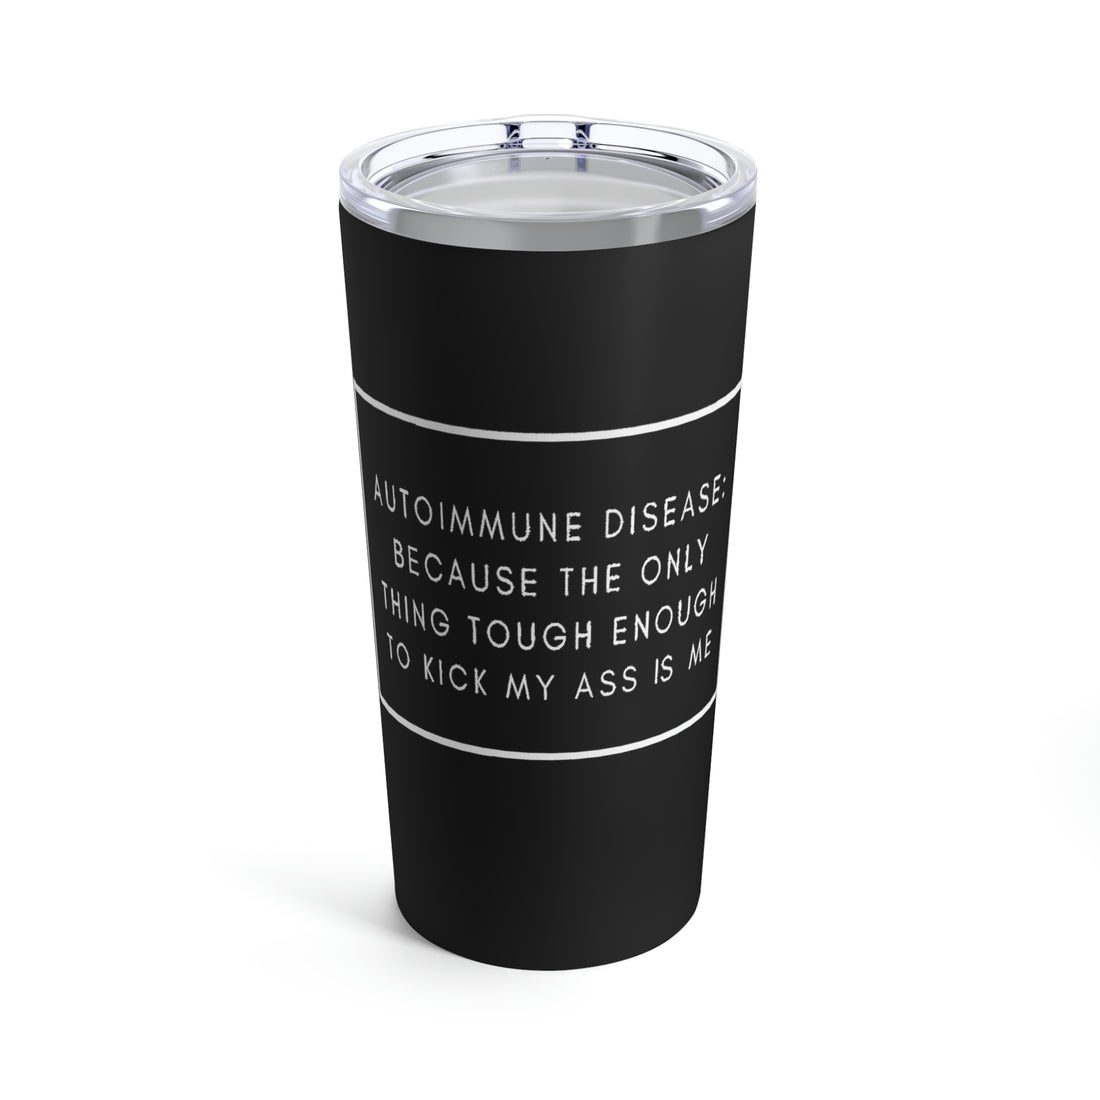 Autoimmune Disease Because The Only Thing Tough Enough To Kick My Ass Is Me - Tumbler 20oz